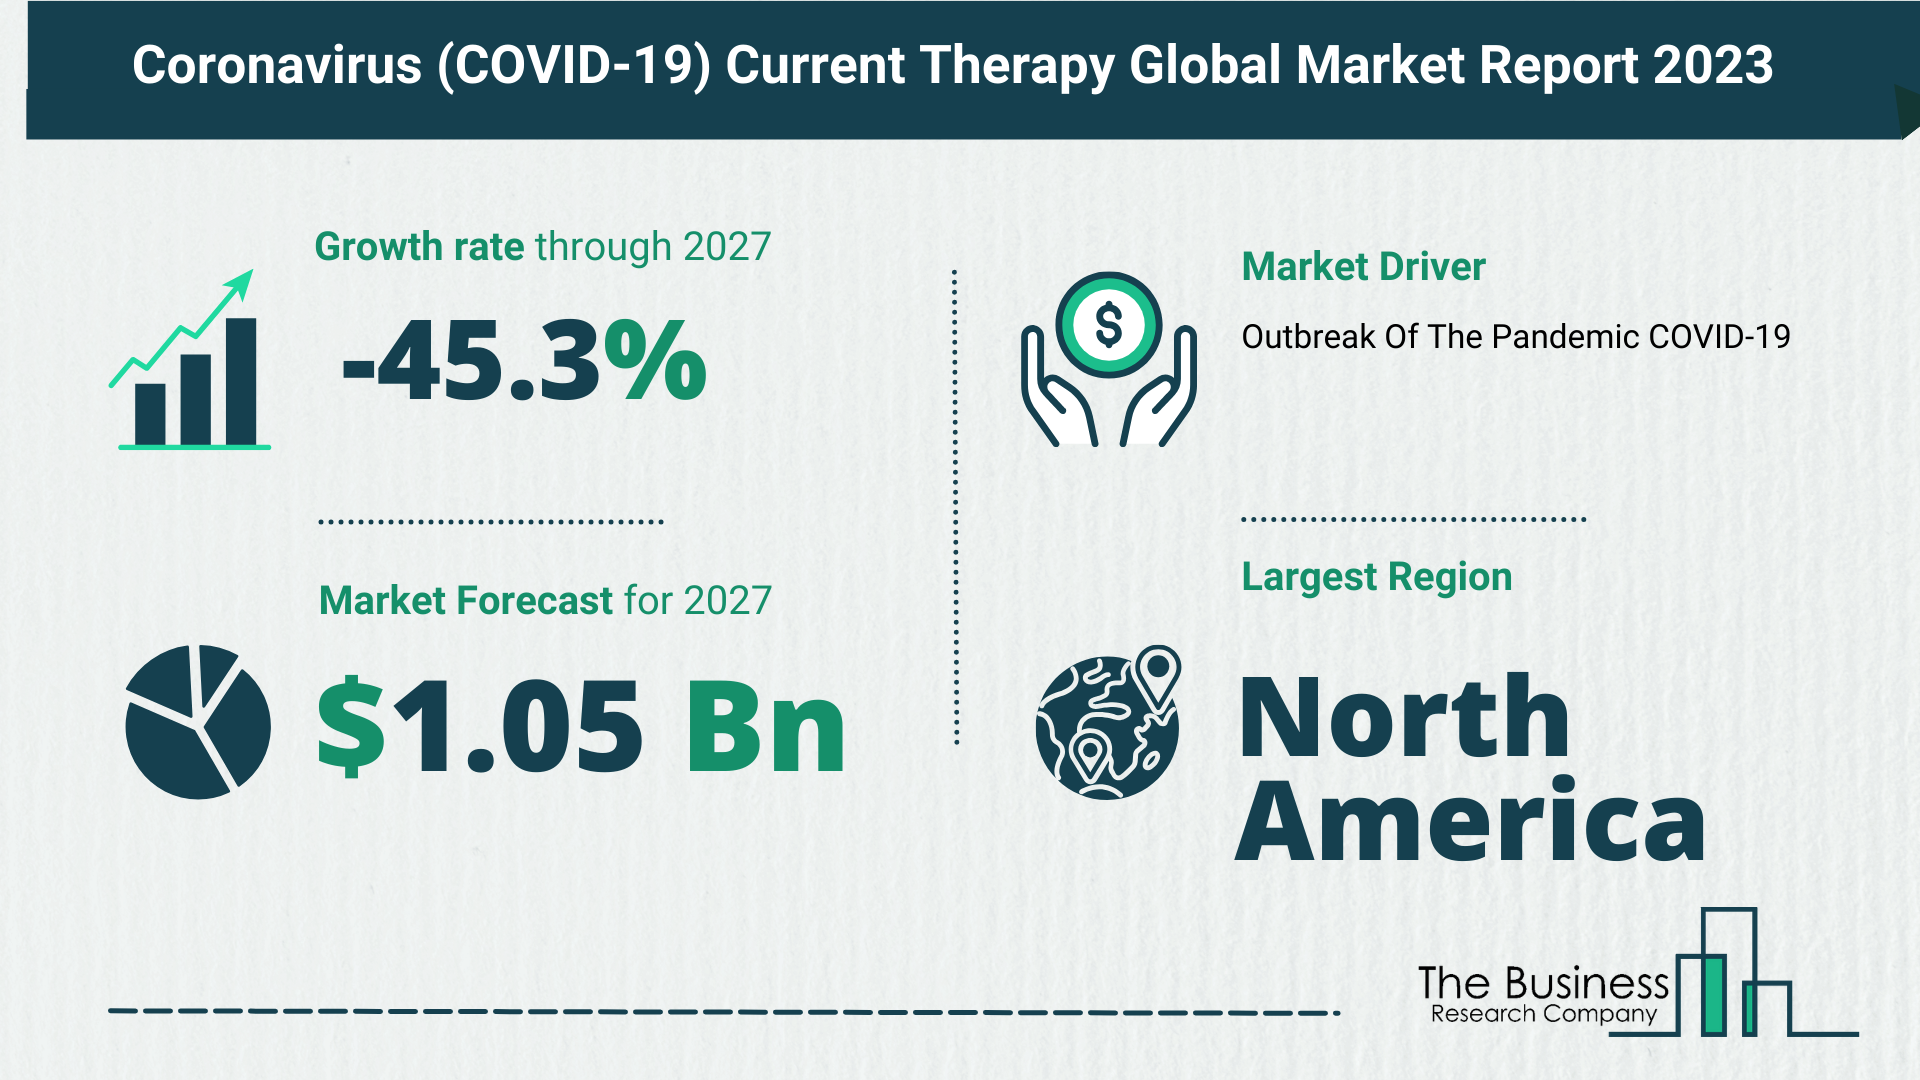 Overview Of The Coronavirus (COVID-19) Current Therapy Market 2023: Size, Drivers, And Trends